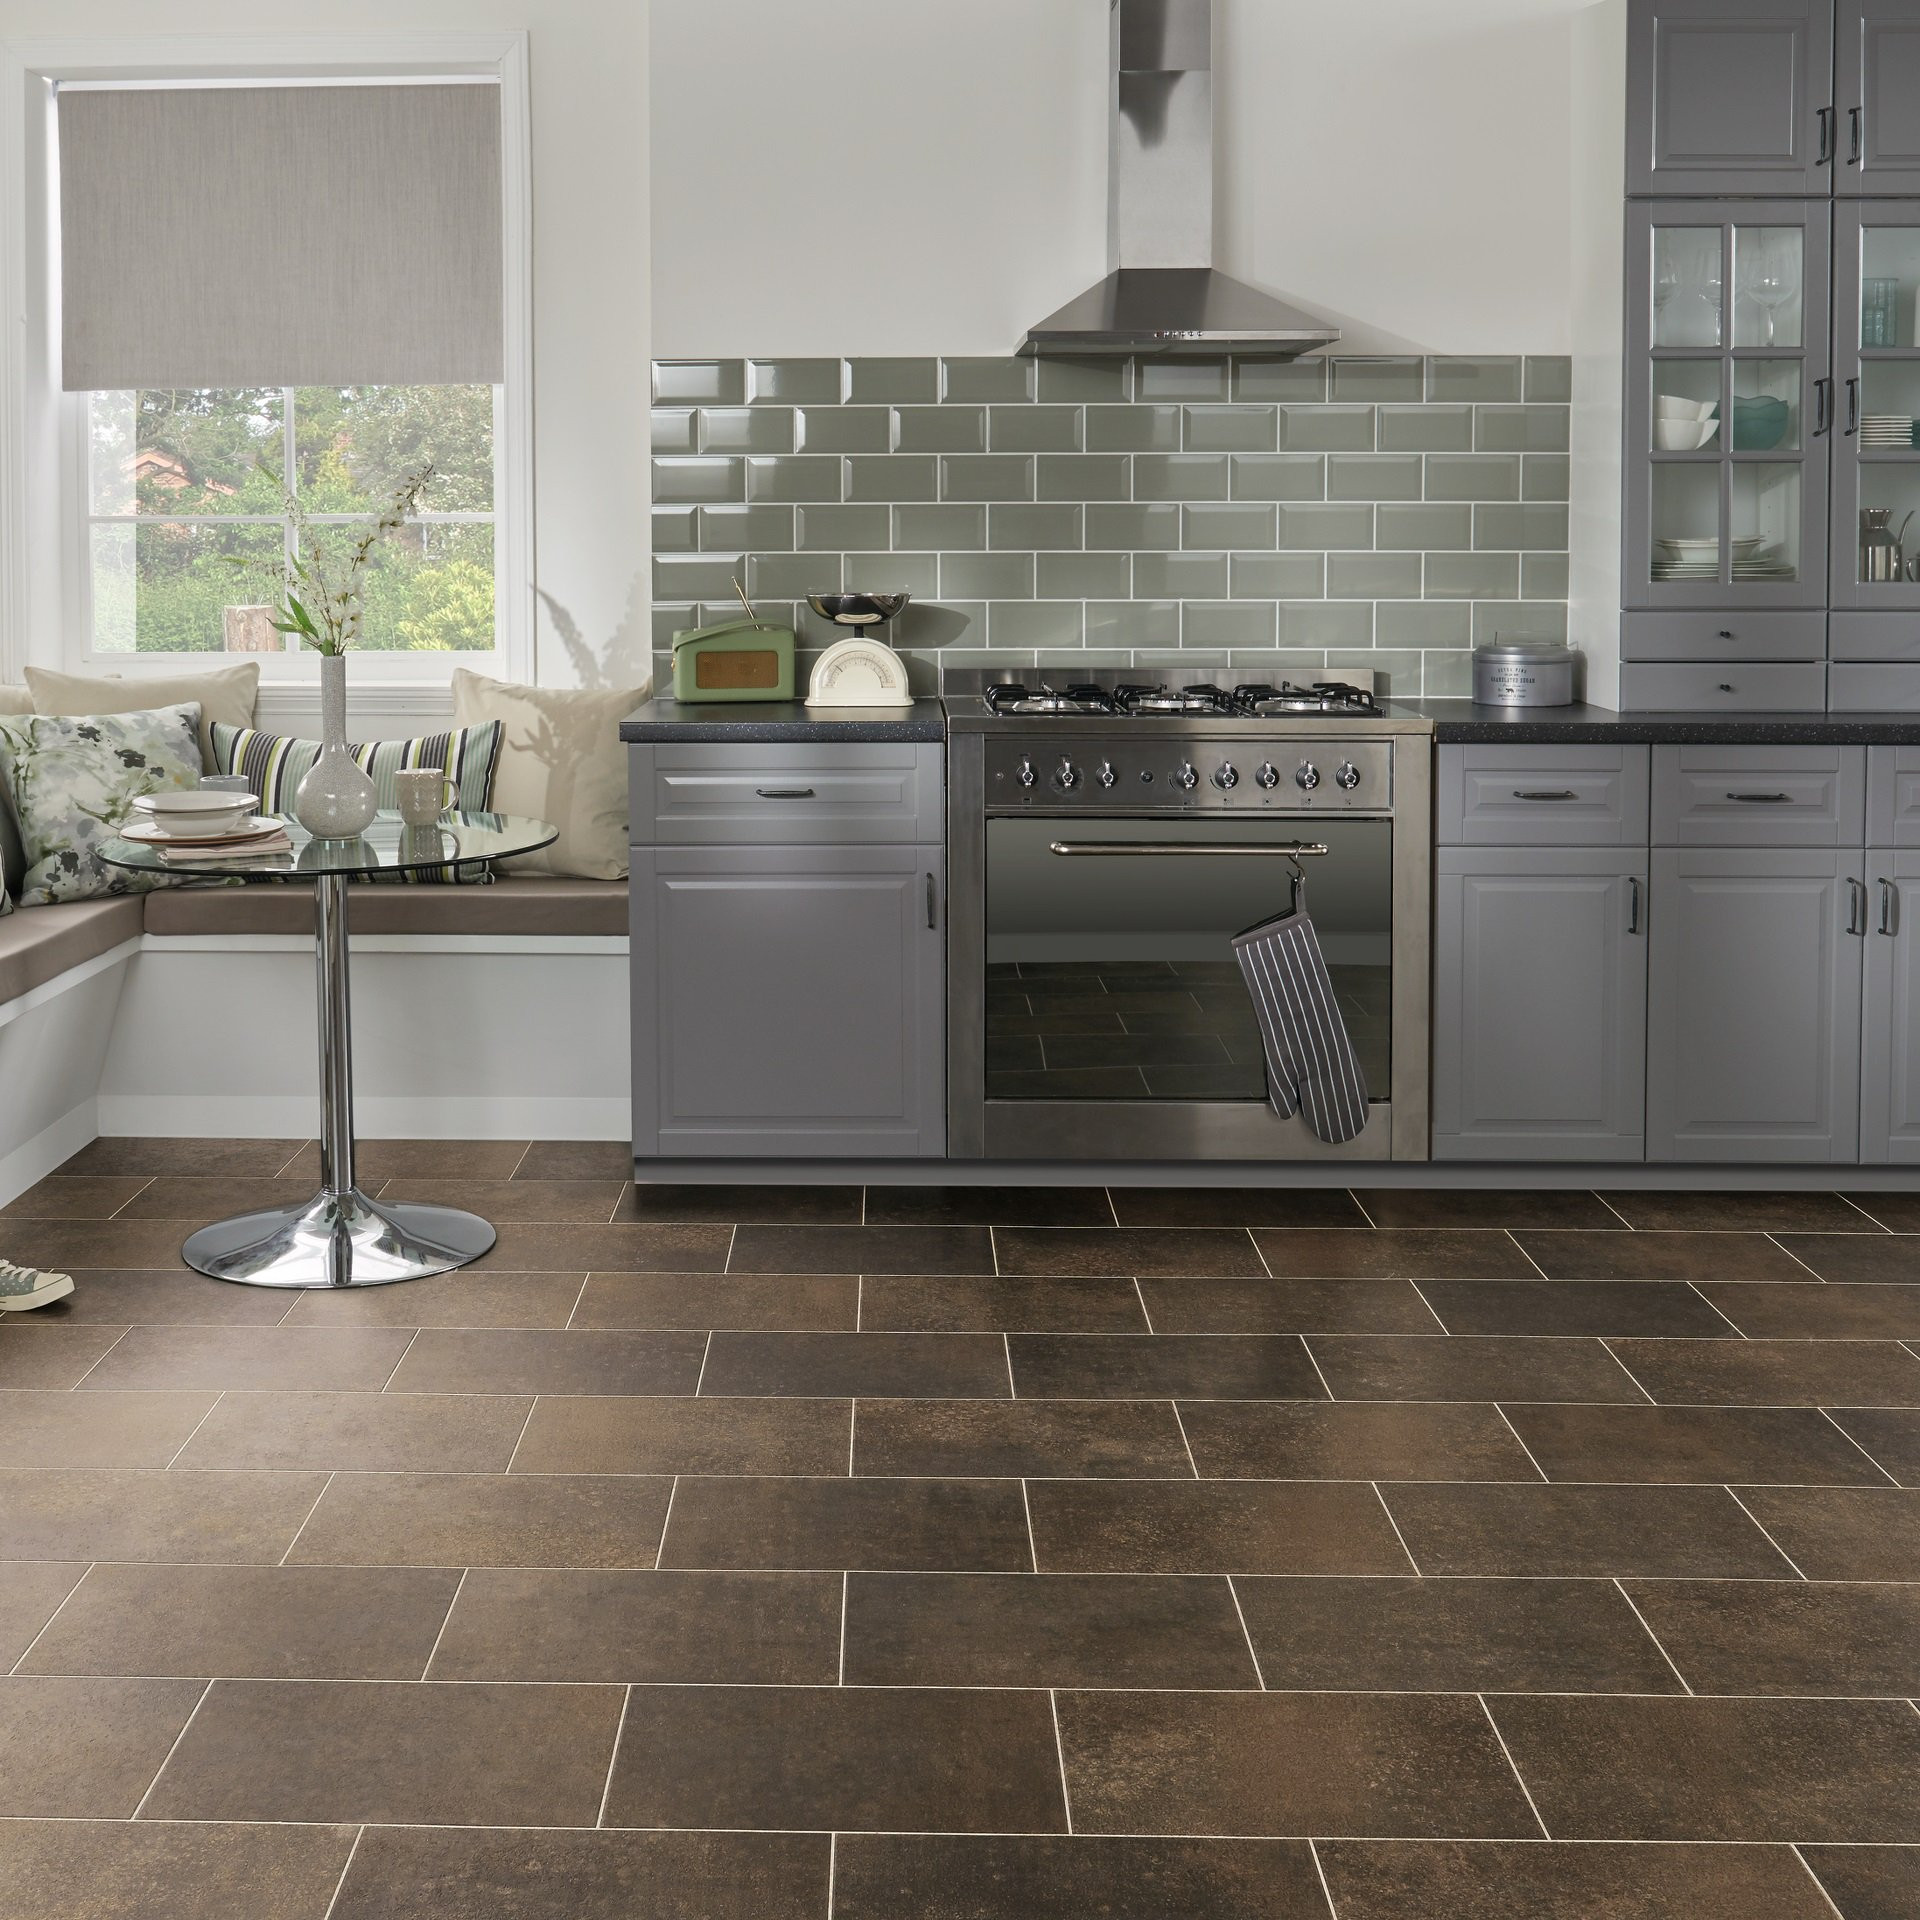 Tile In Kitchen Floor
 Kitchen Flooring Tiles and Ideas for Your Home